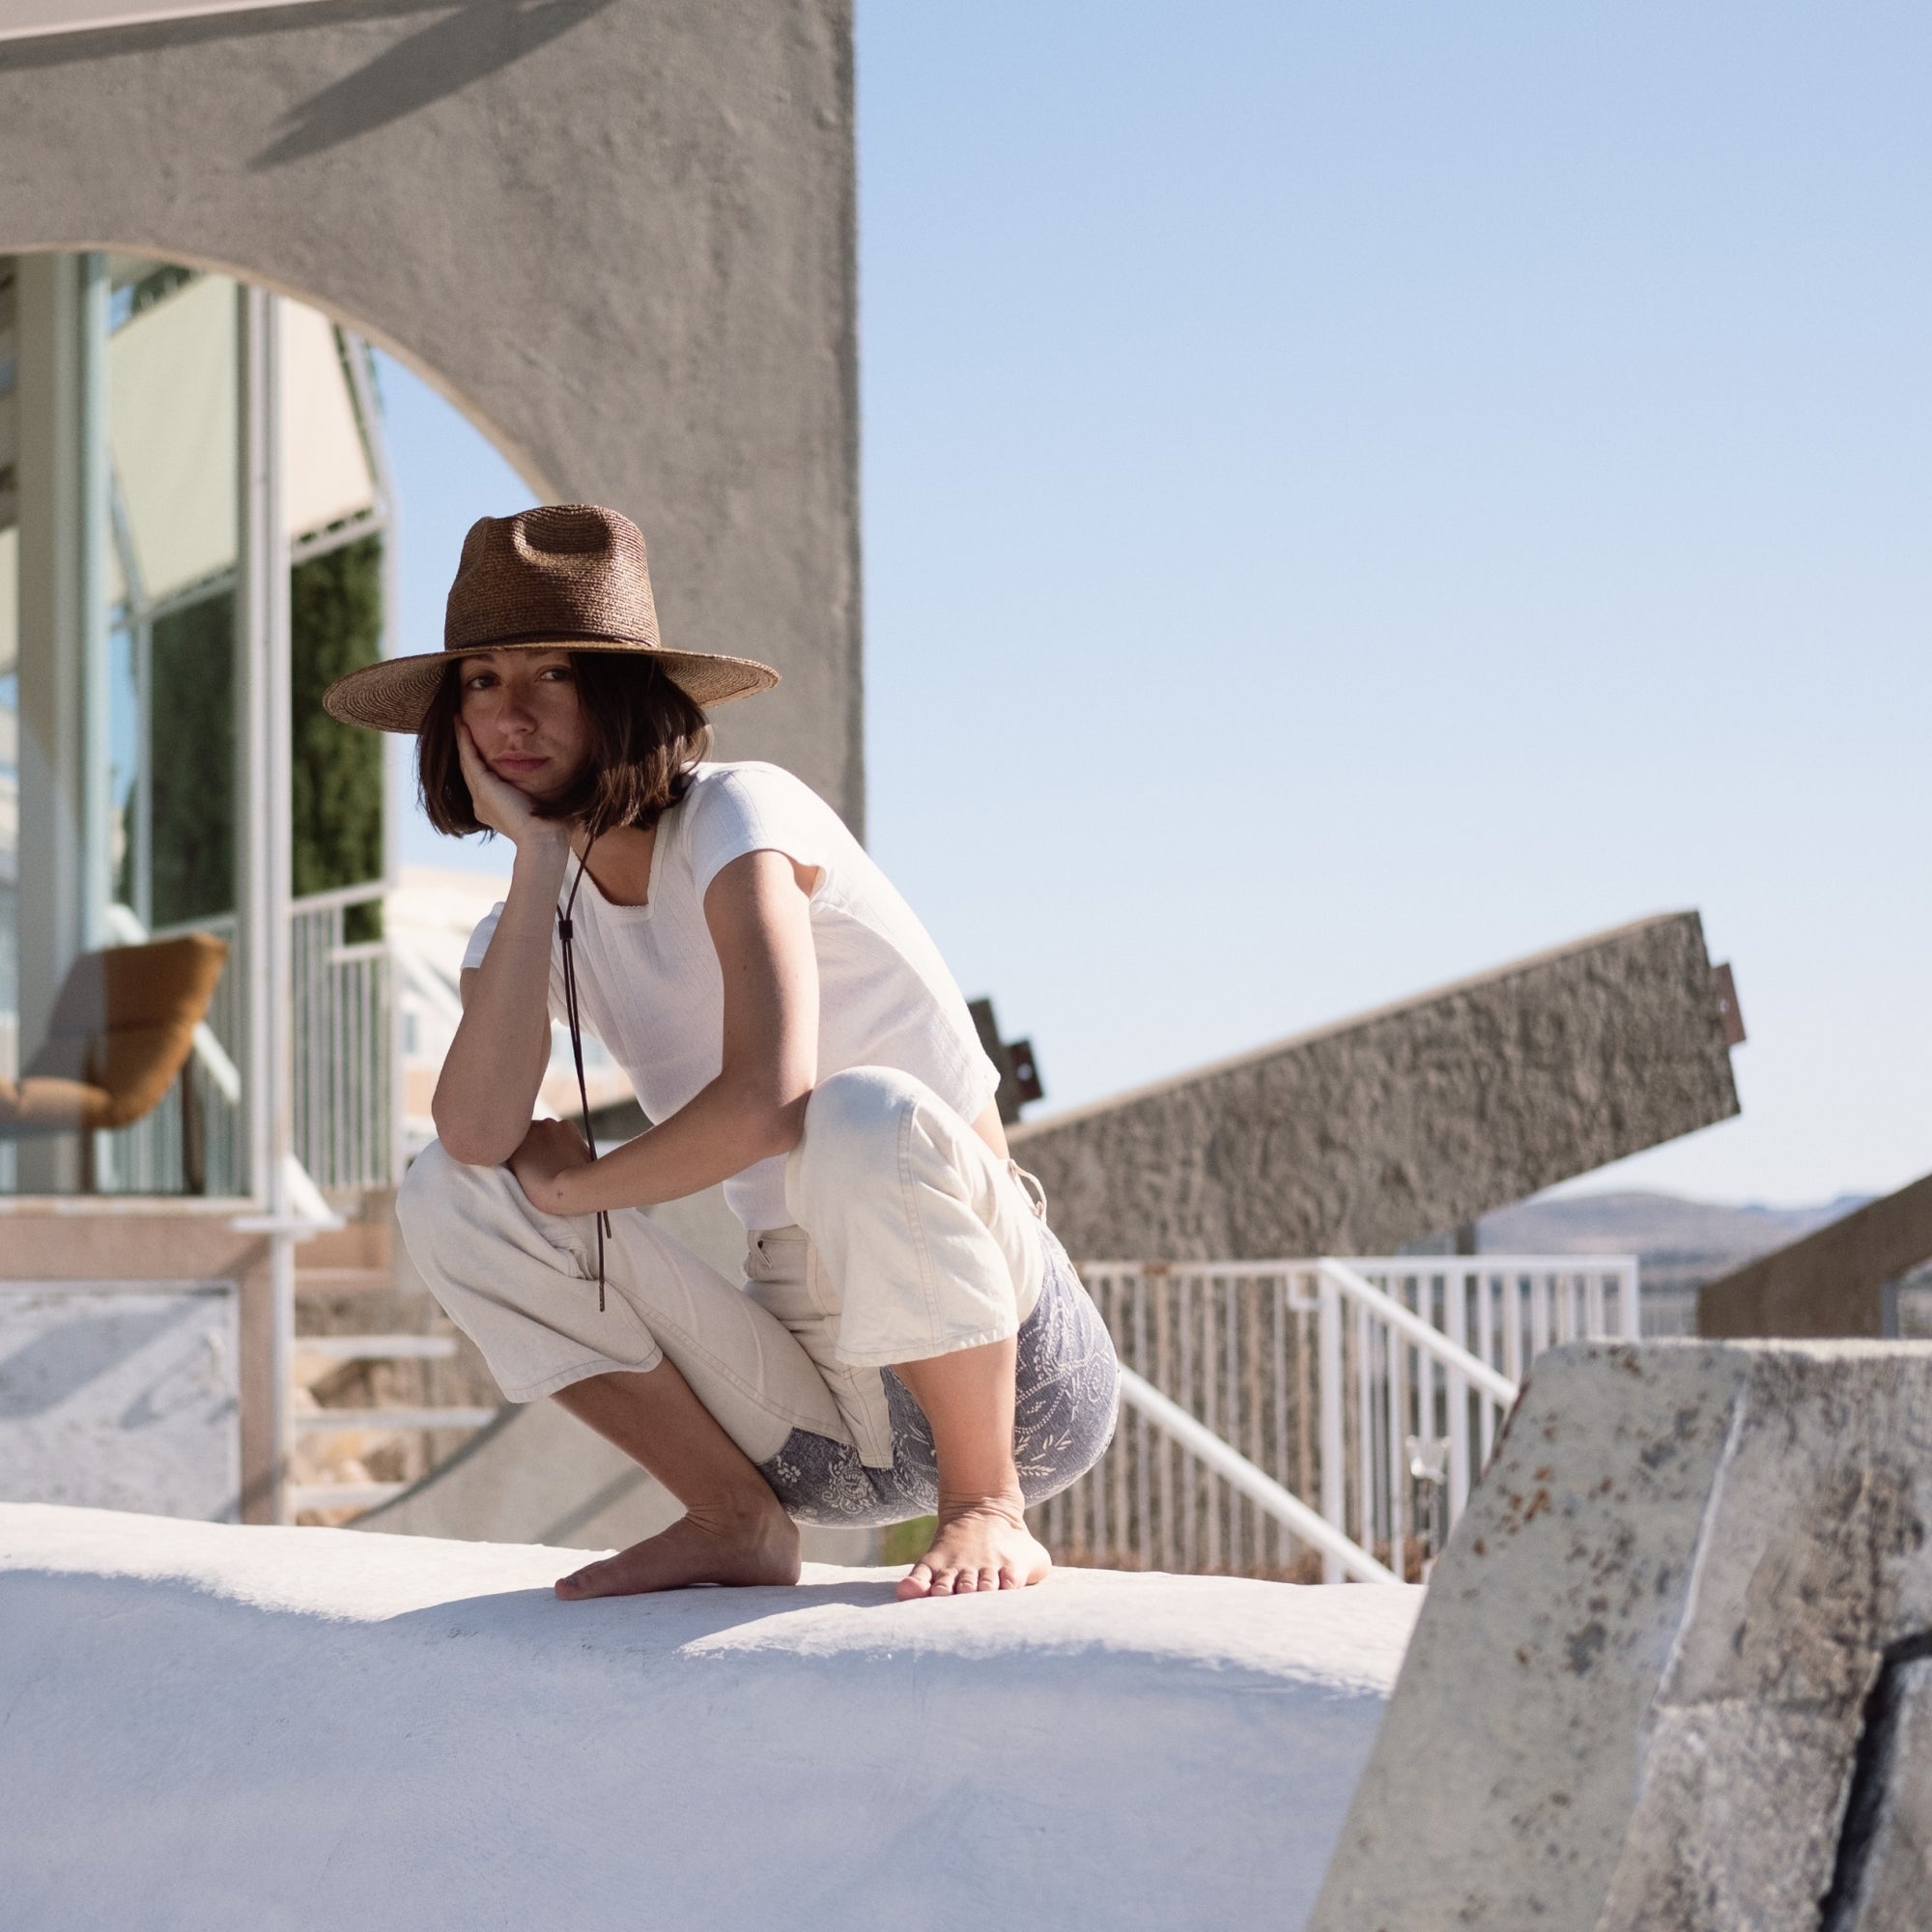 Lucette squatting on top of a ledge in Arcosanti